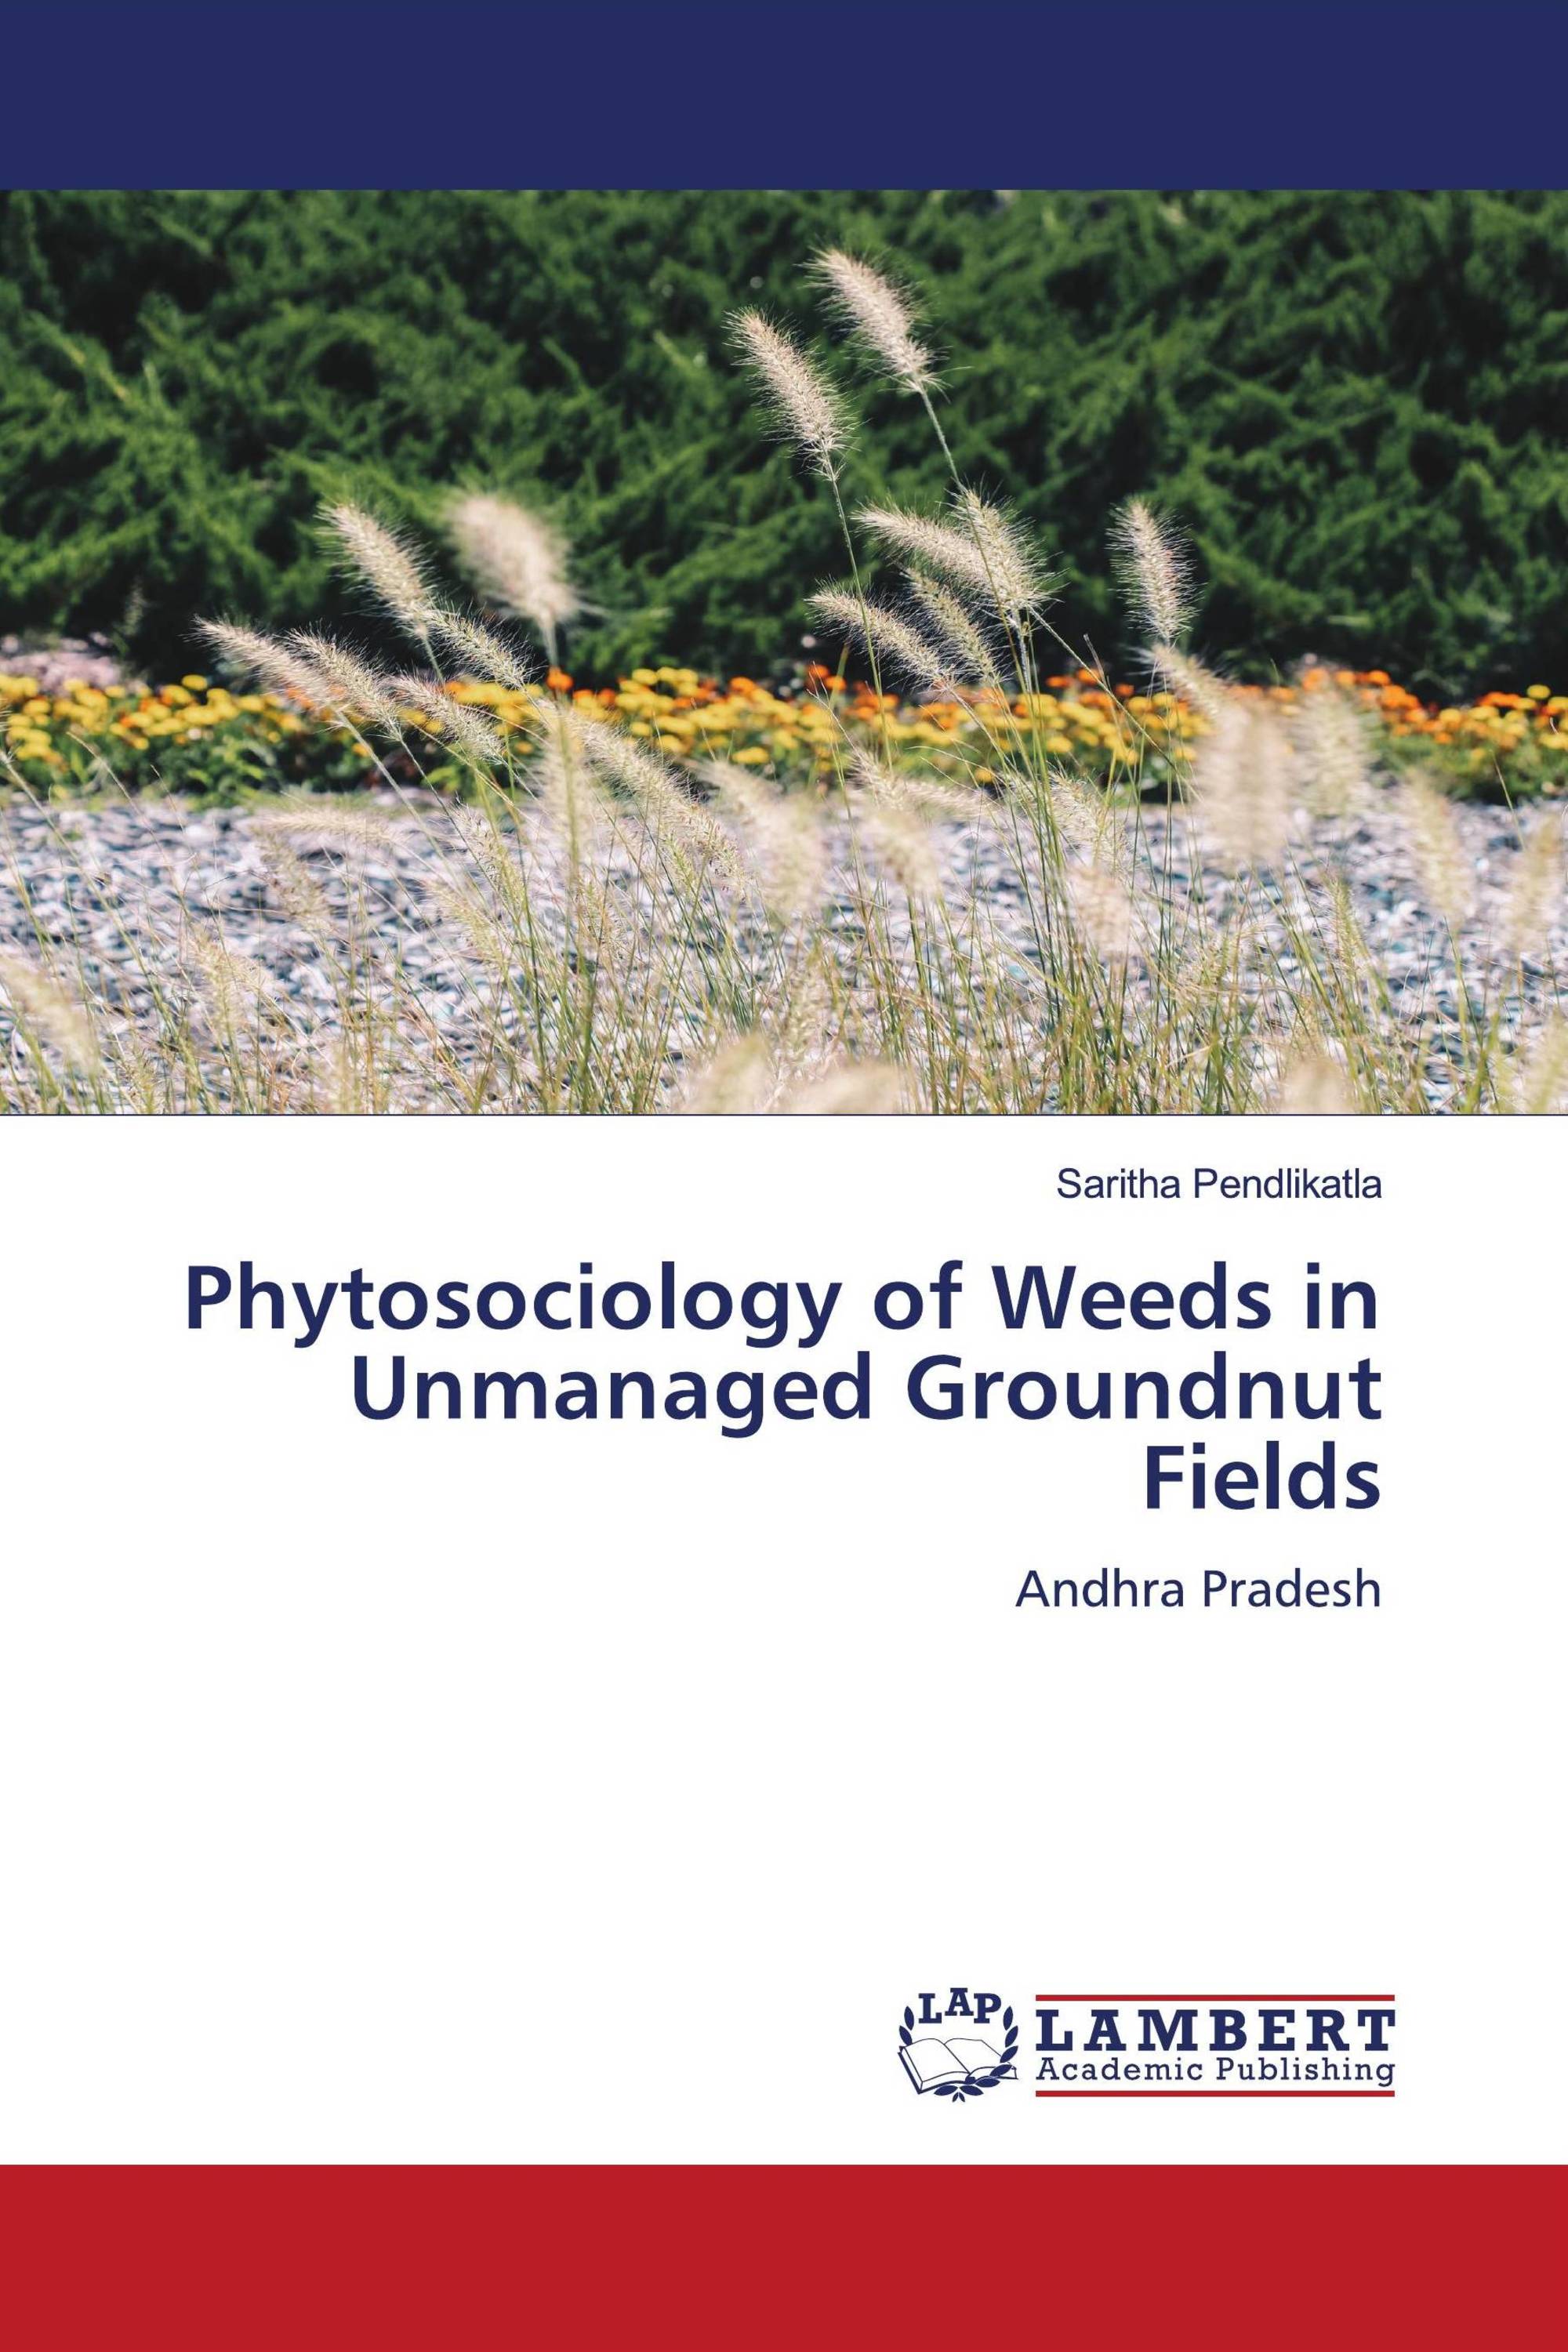 Phytosociology of Weeds in Unmanaged Groundnut Fields